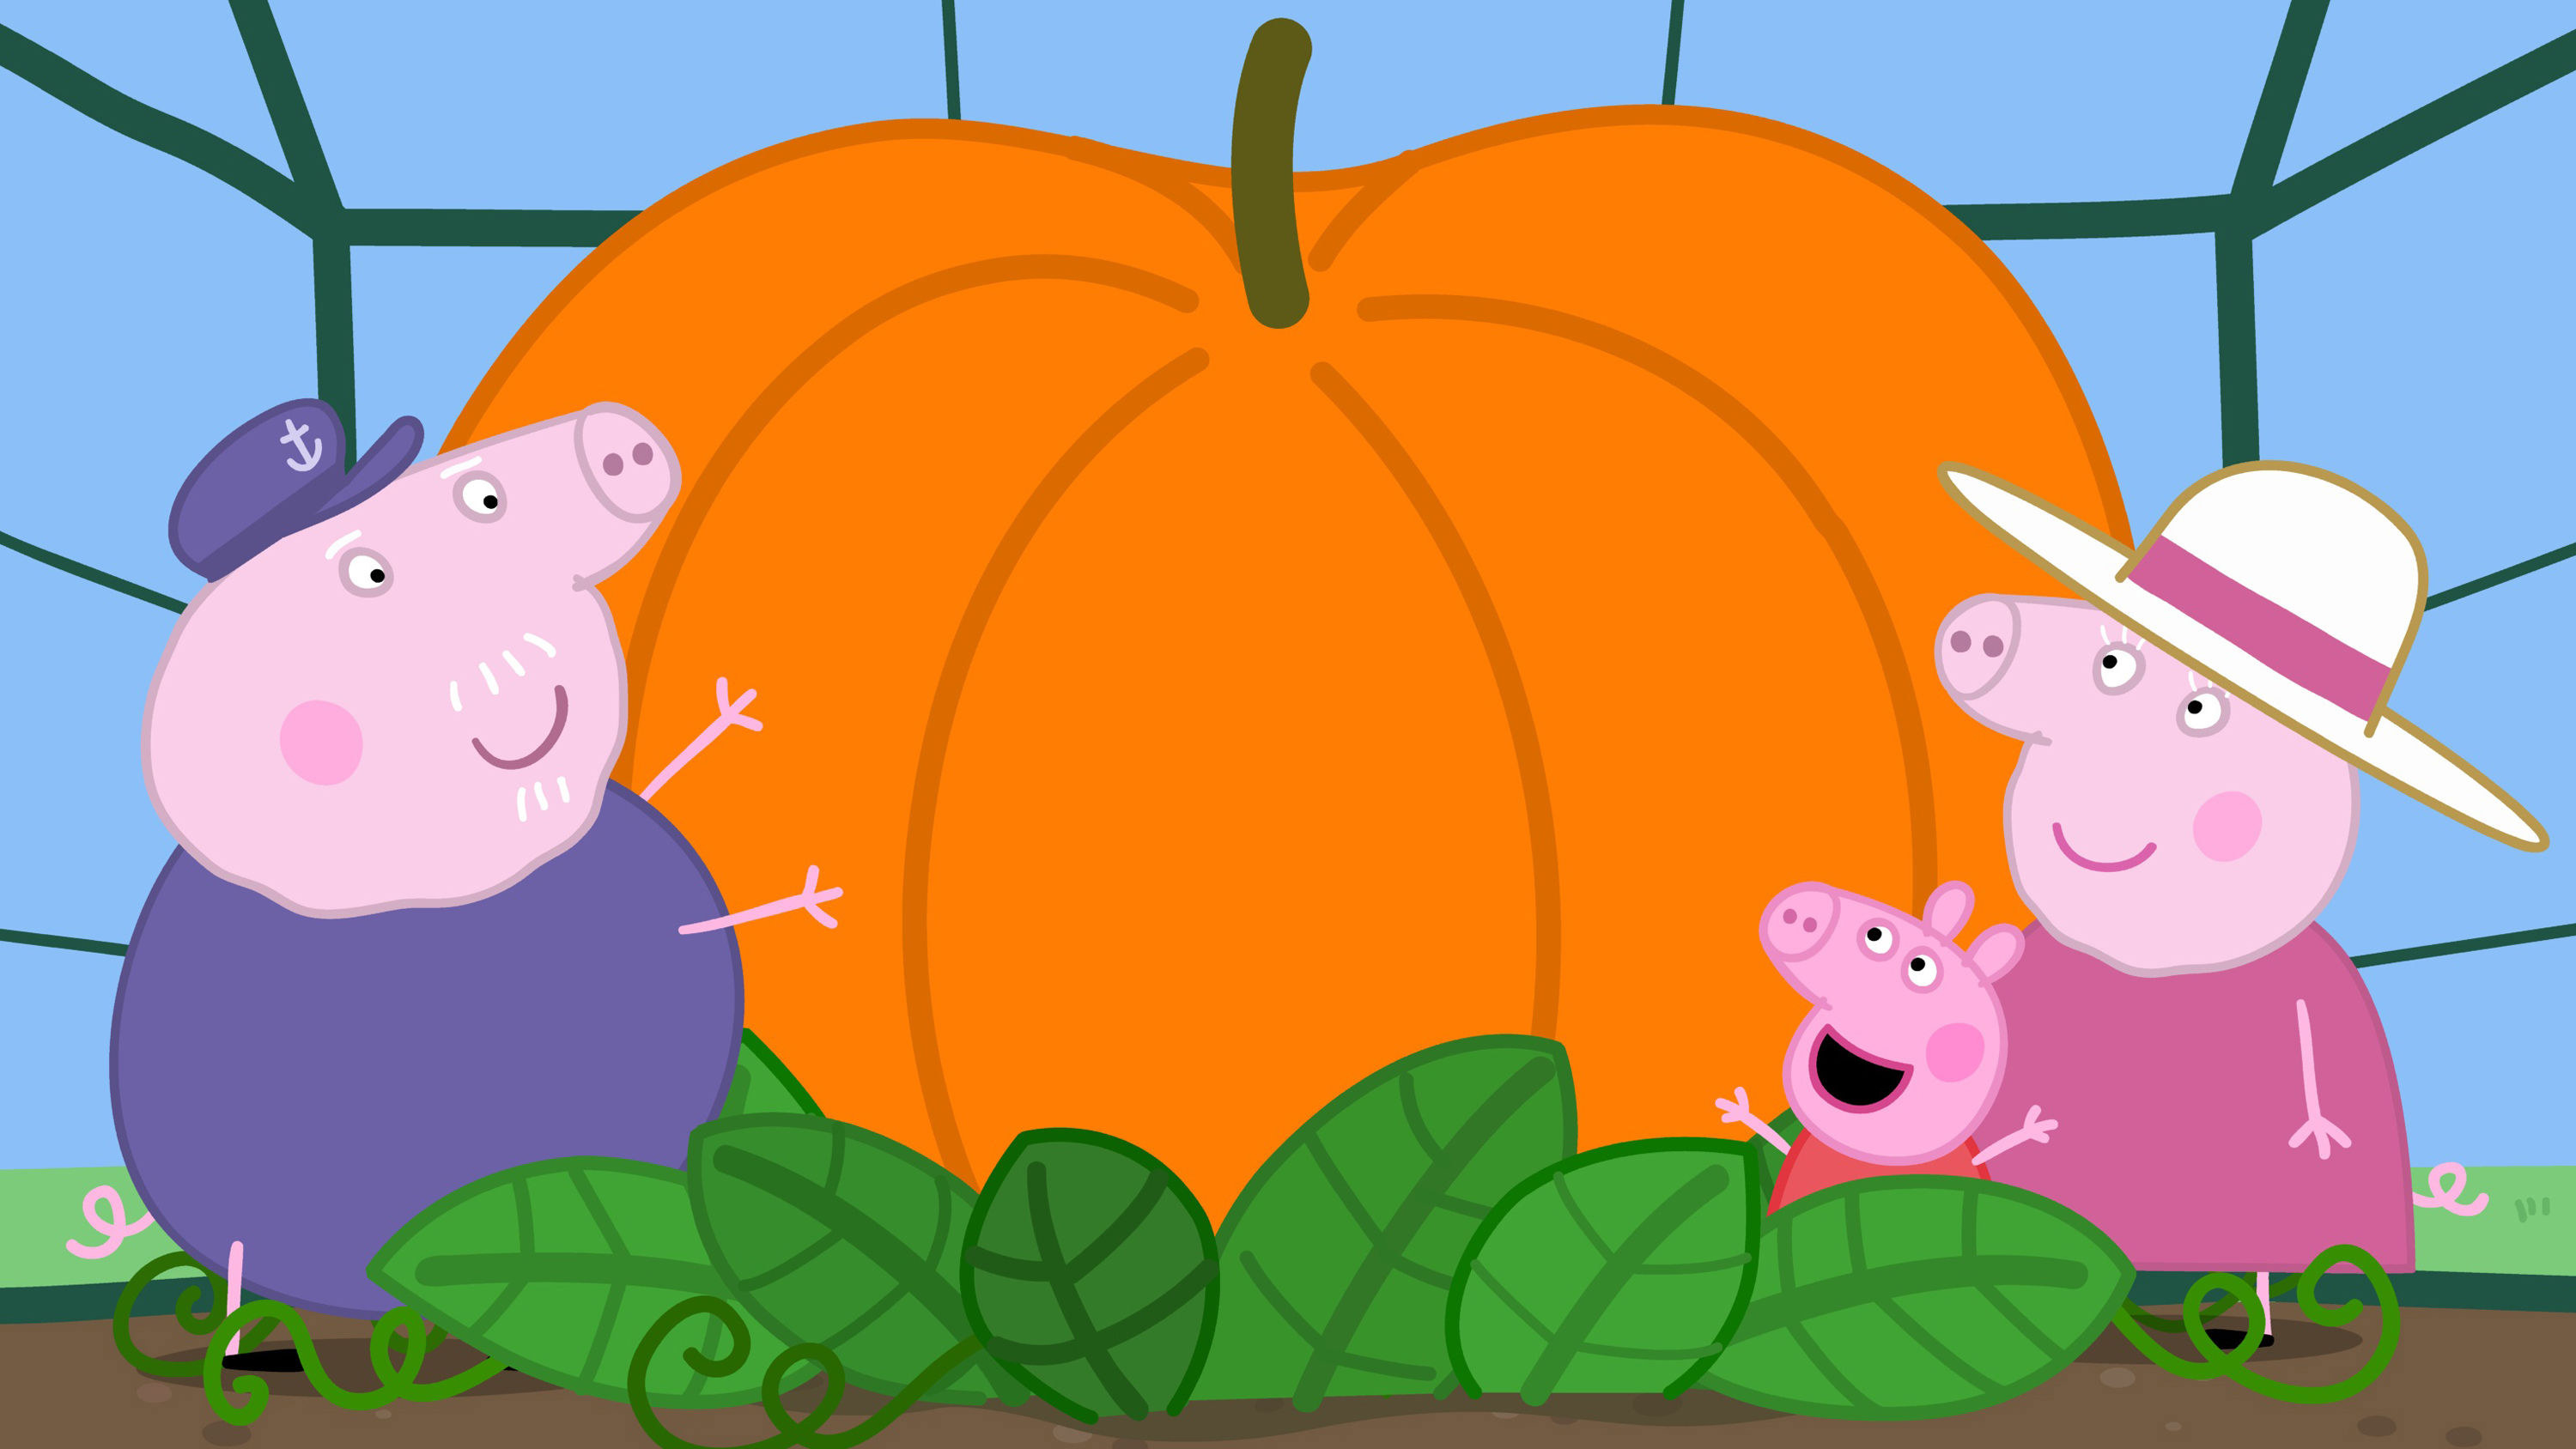 Screen shot from &quot;Peppa Pig&quot;